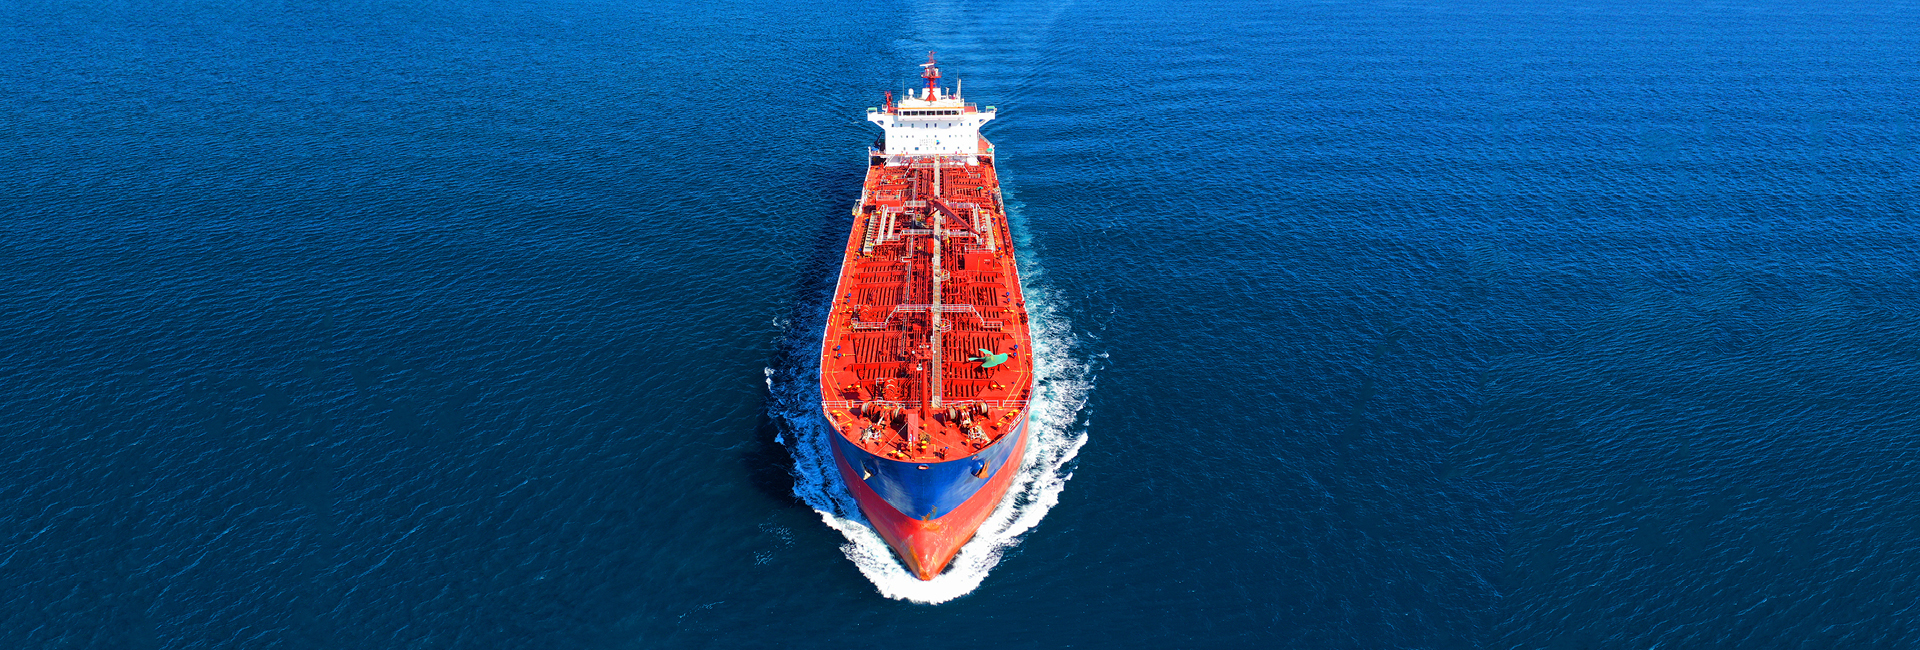 Vessel Protection Strategies For Safe Seafaring